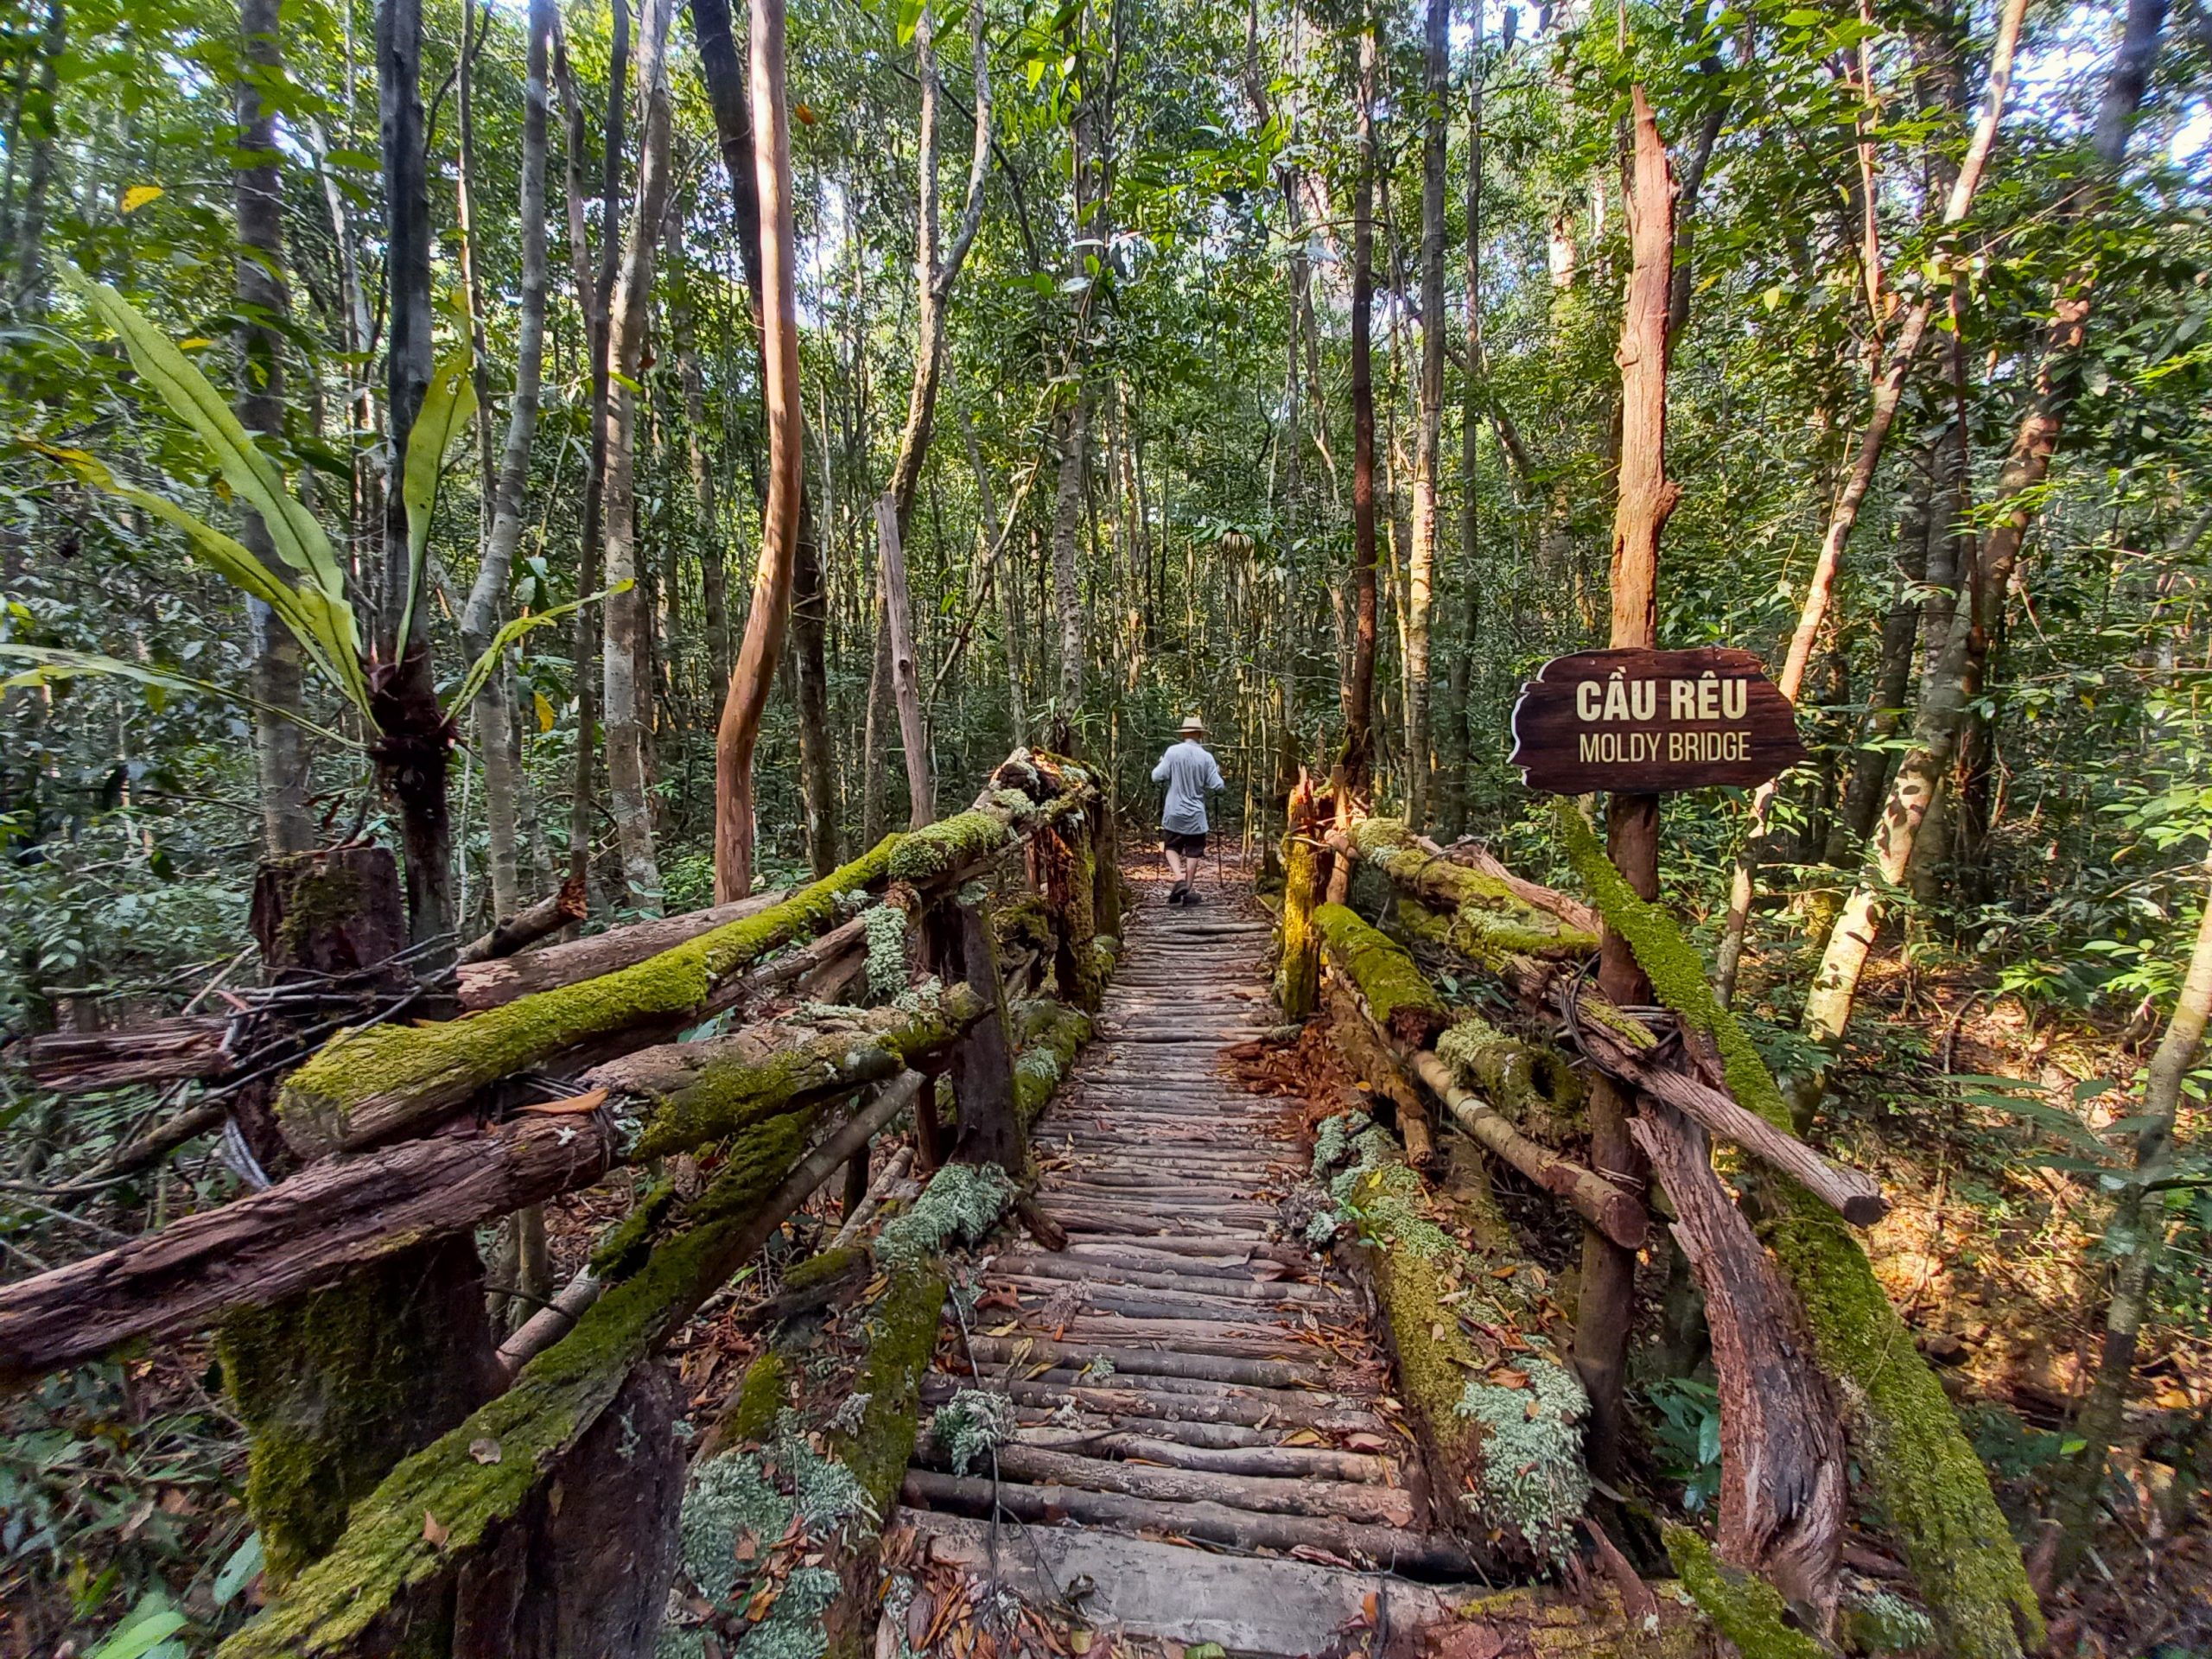 Take a journey of discovery through Phu Quoc National Park